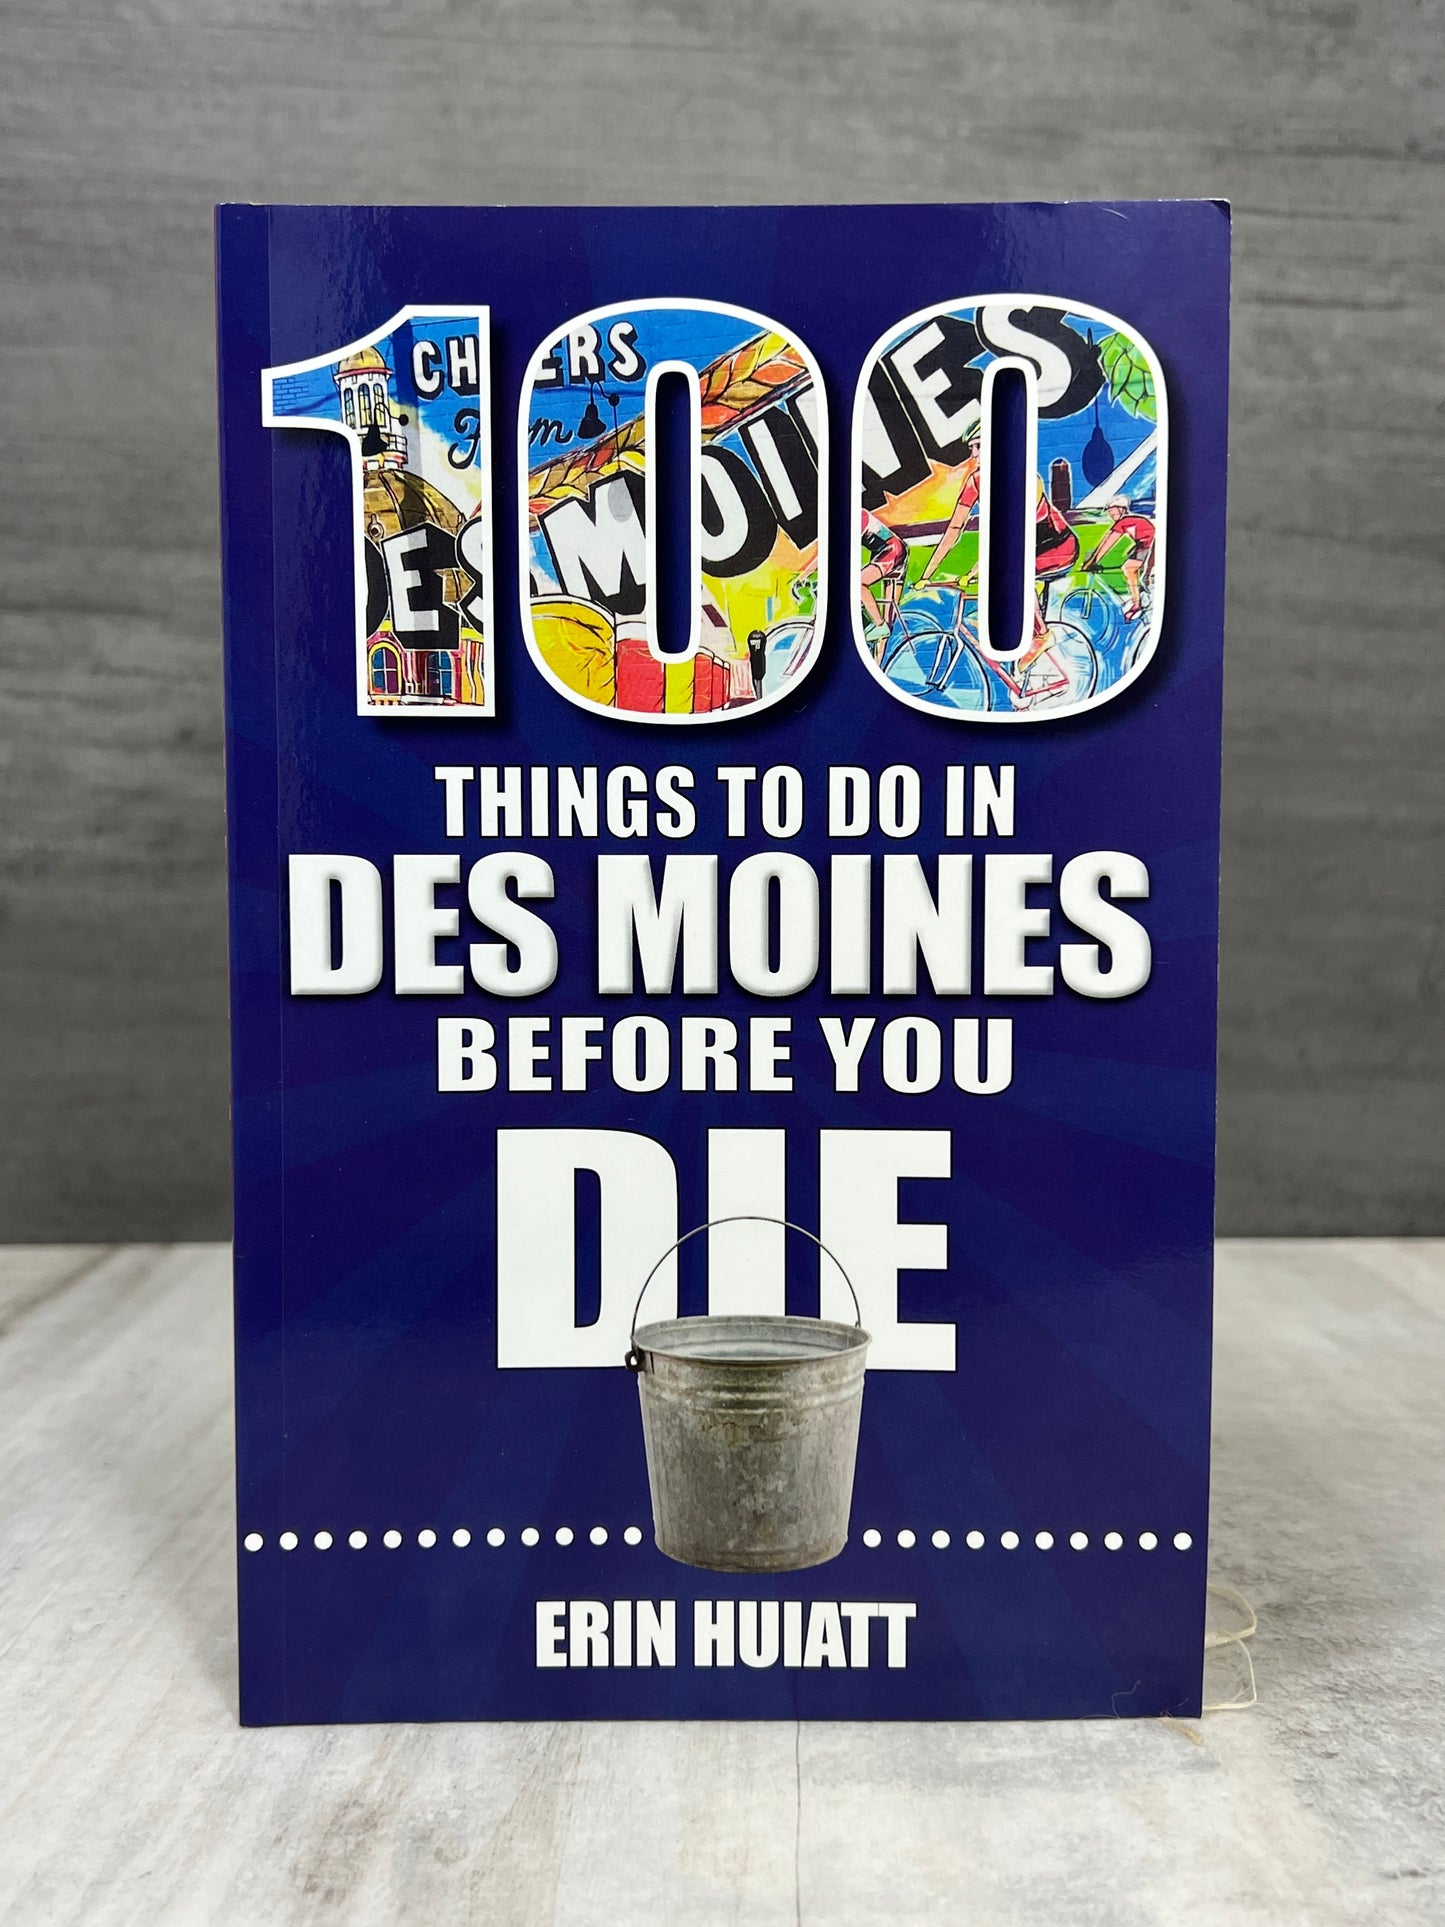 100 Things to Do in Des Moines Before You Die